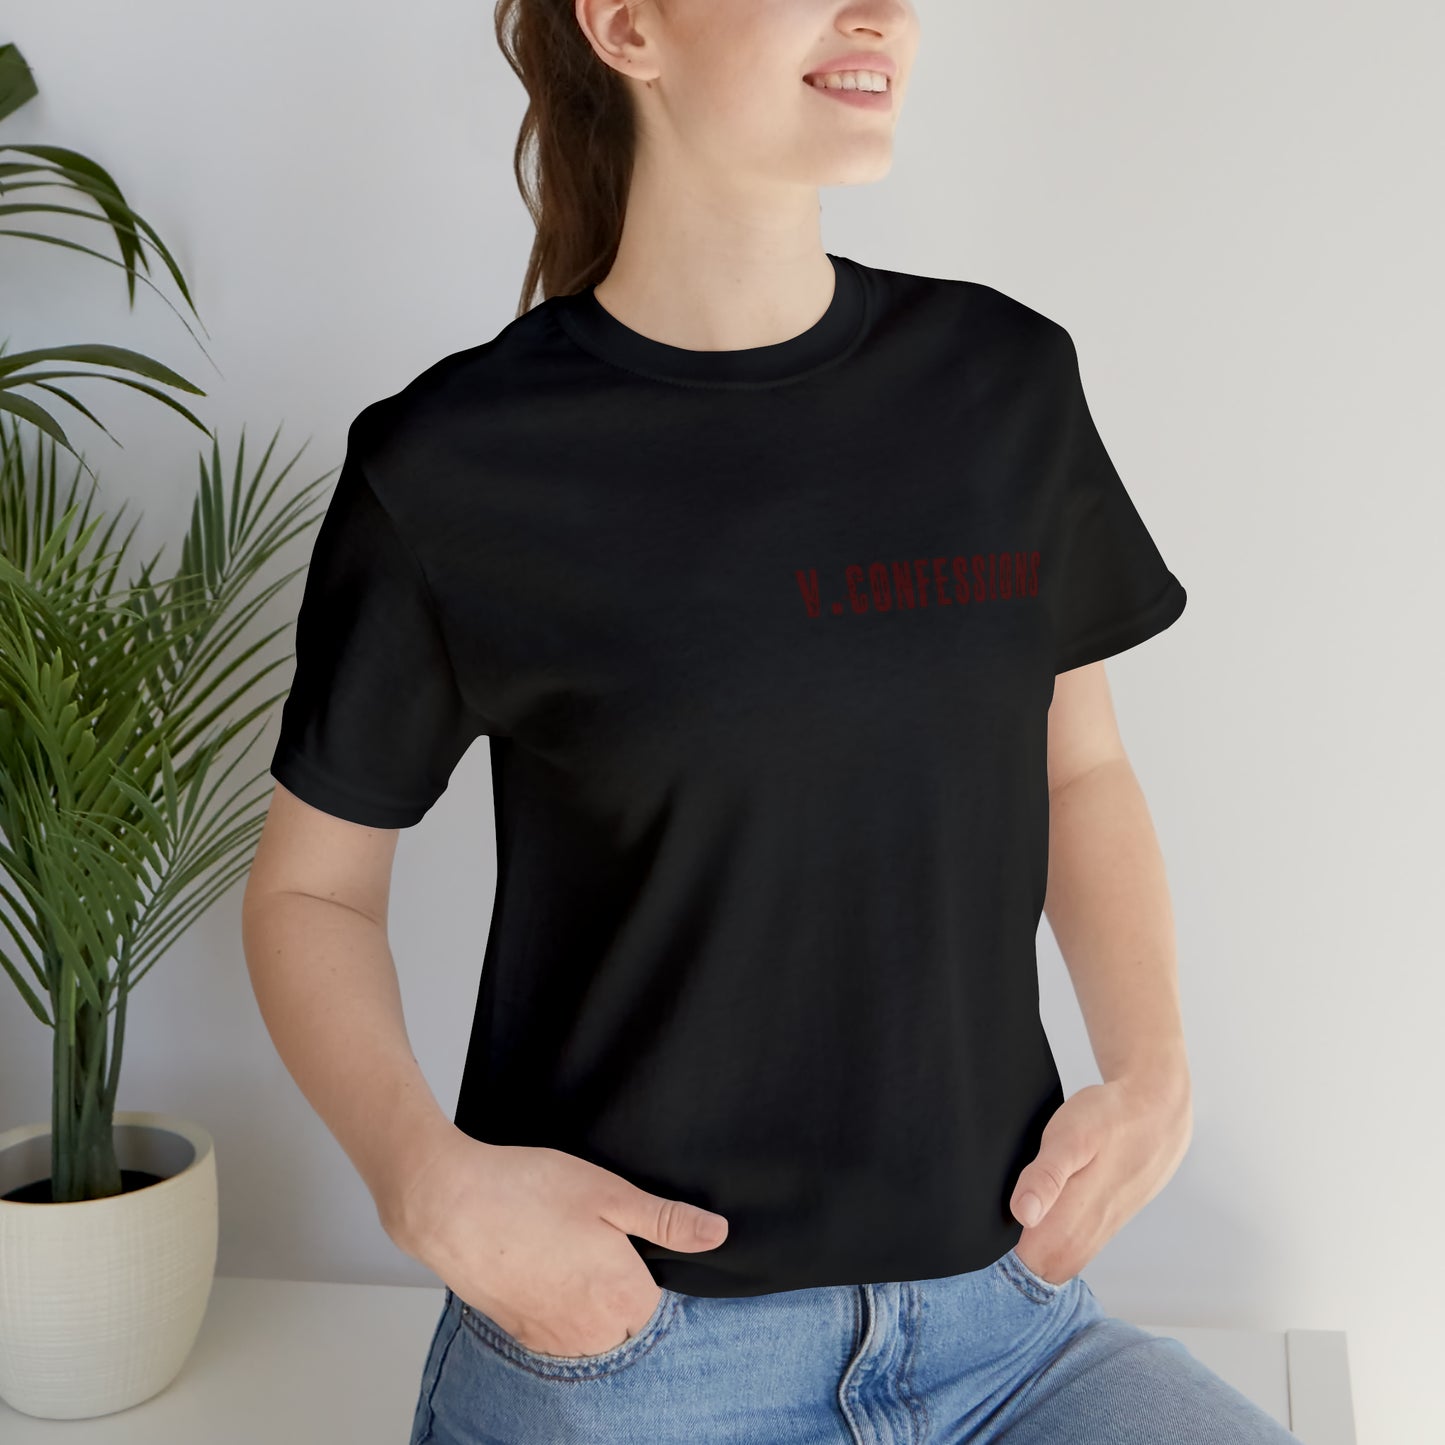 I, Shapeshifter Confessions Tee